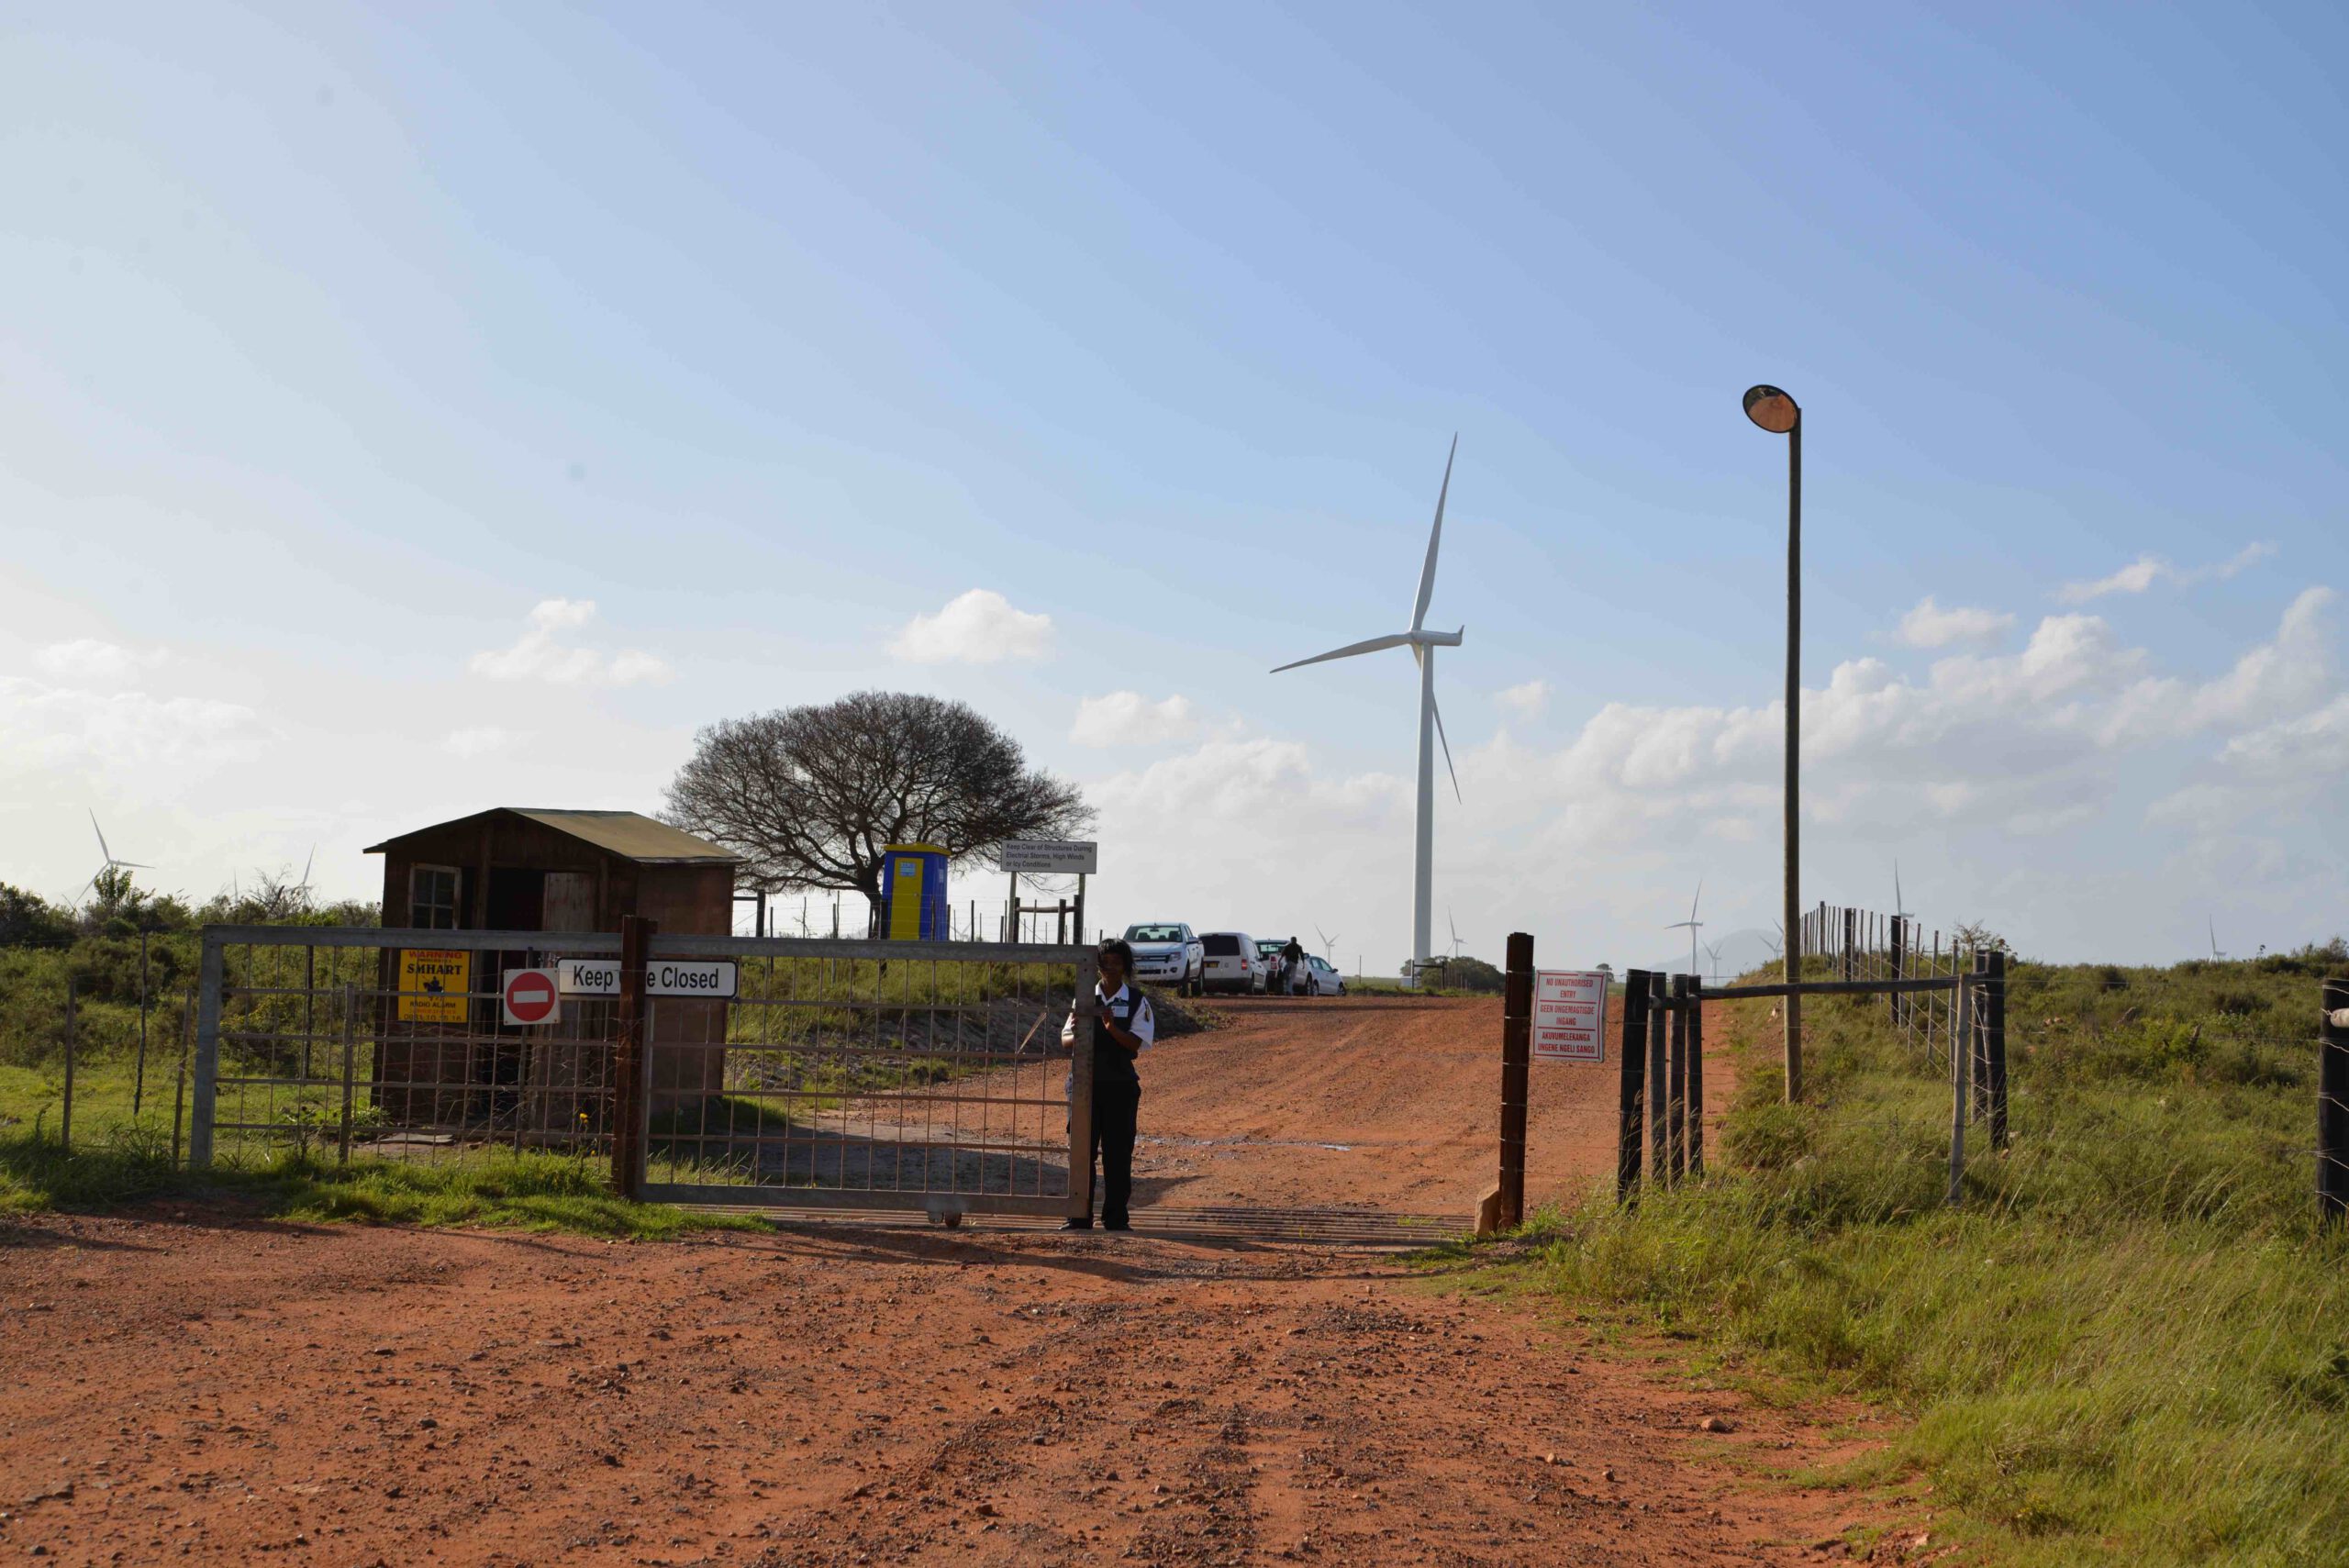 The sub-Saharan winds Developments in the African wind market